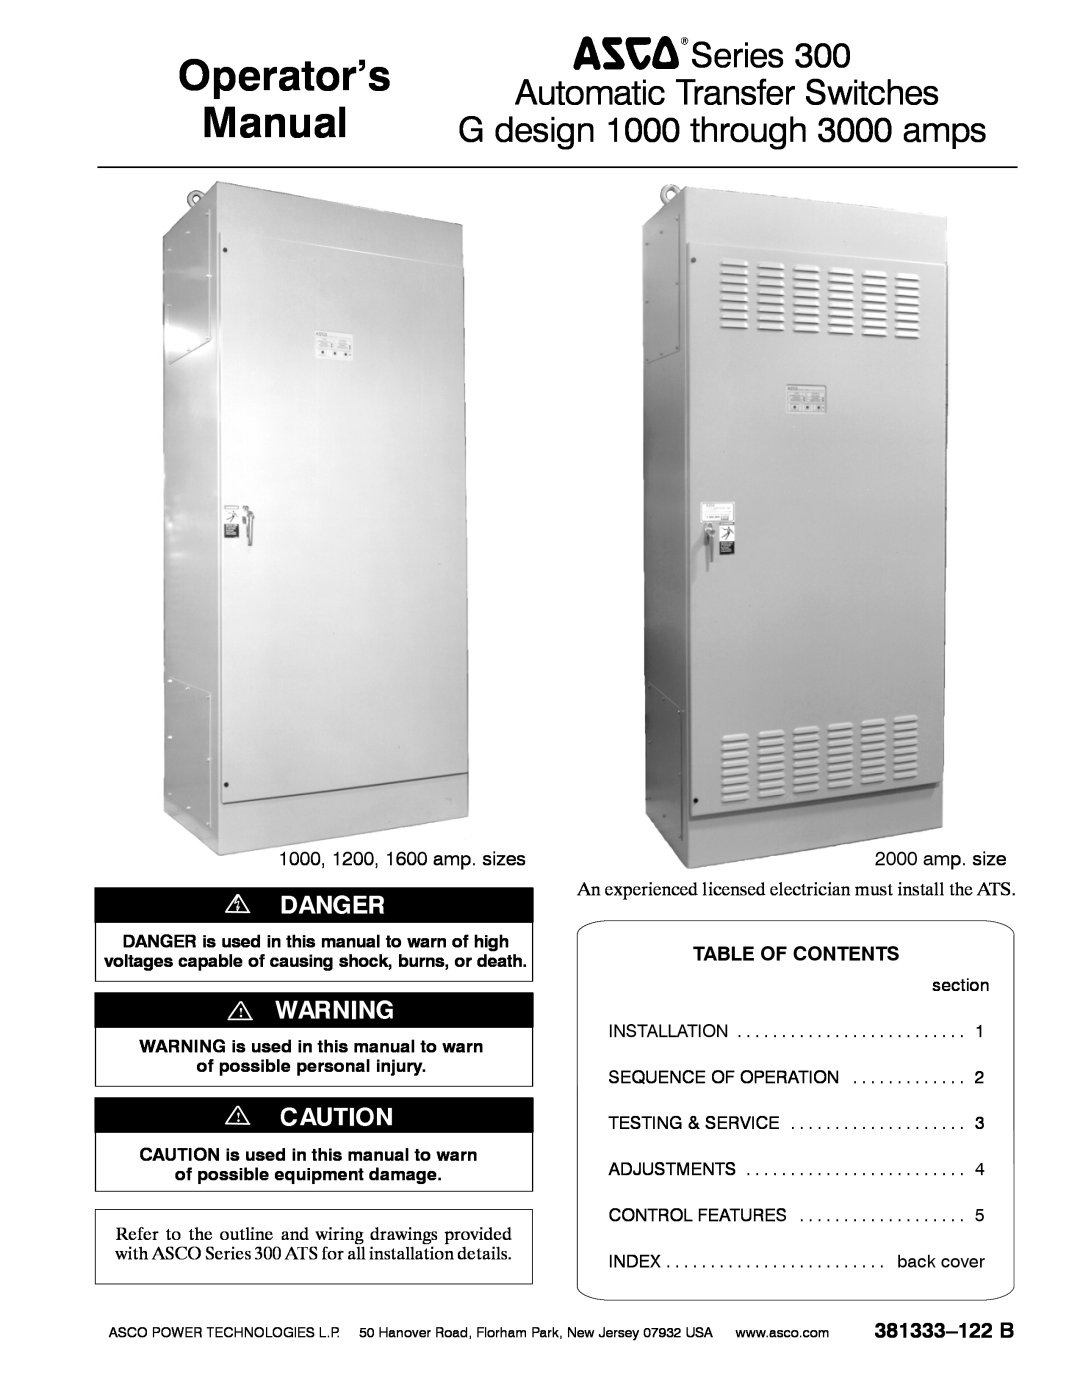 TRENDnet Series 300 manual 1000, 1200, 1600 amp. sizes, 2000 amp. size, Table Of Contents, 381333-122 B, Operator’s Manual 